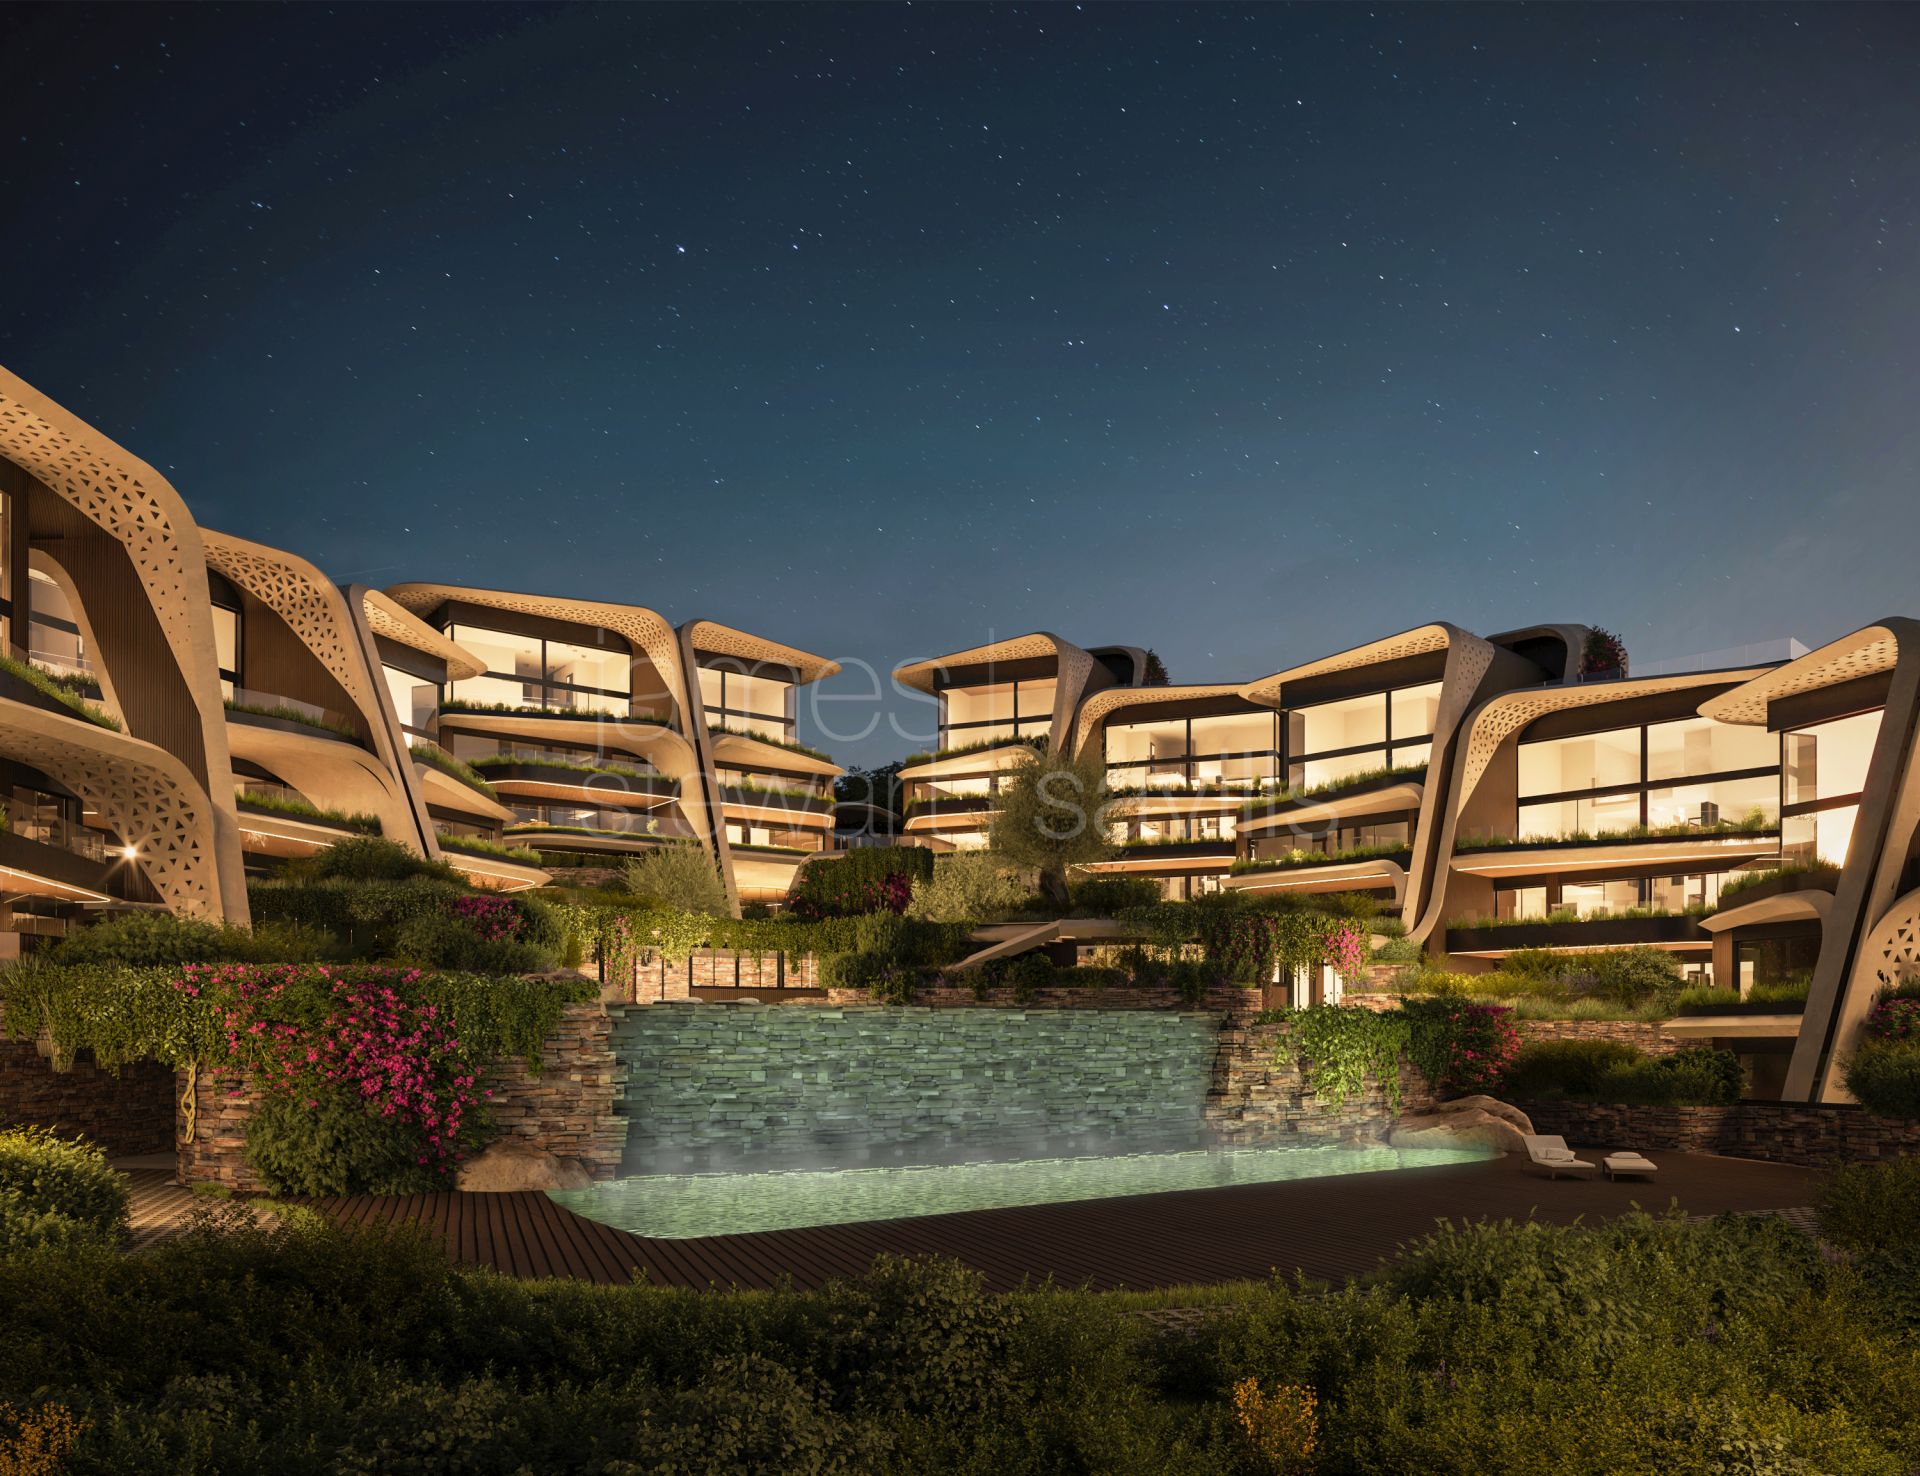 Fabulous new project of futuristic apartments next to Sotogrande - 4 bedrooms from € 2,187,000